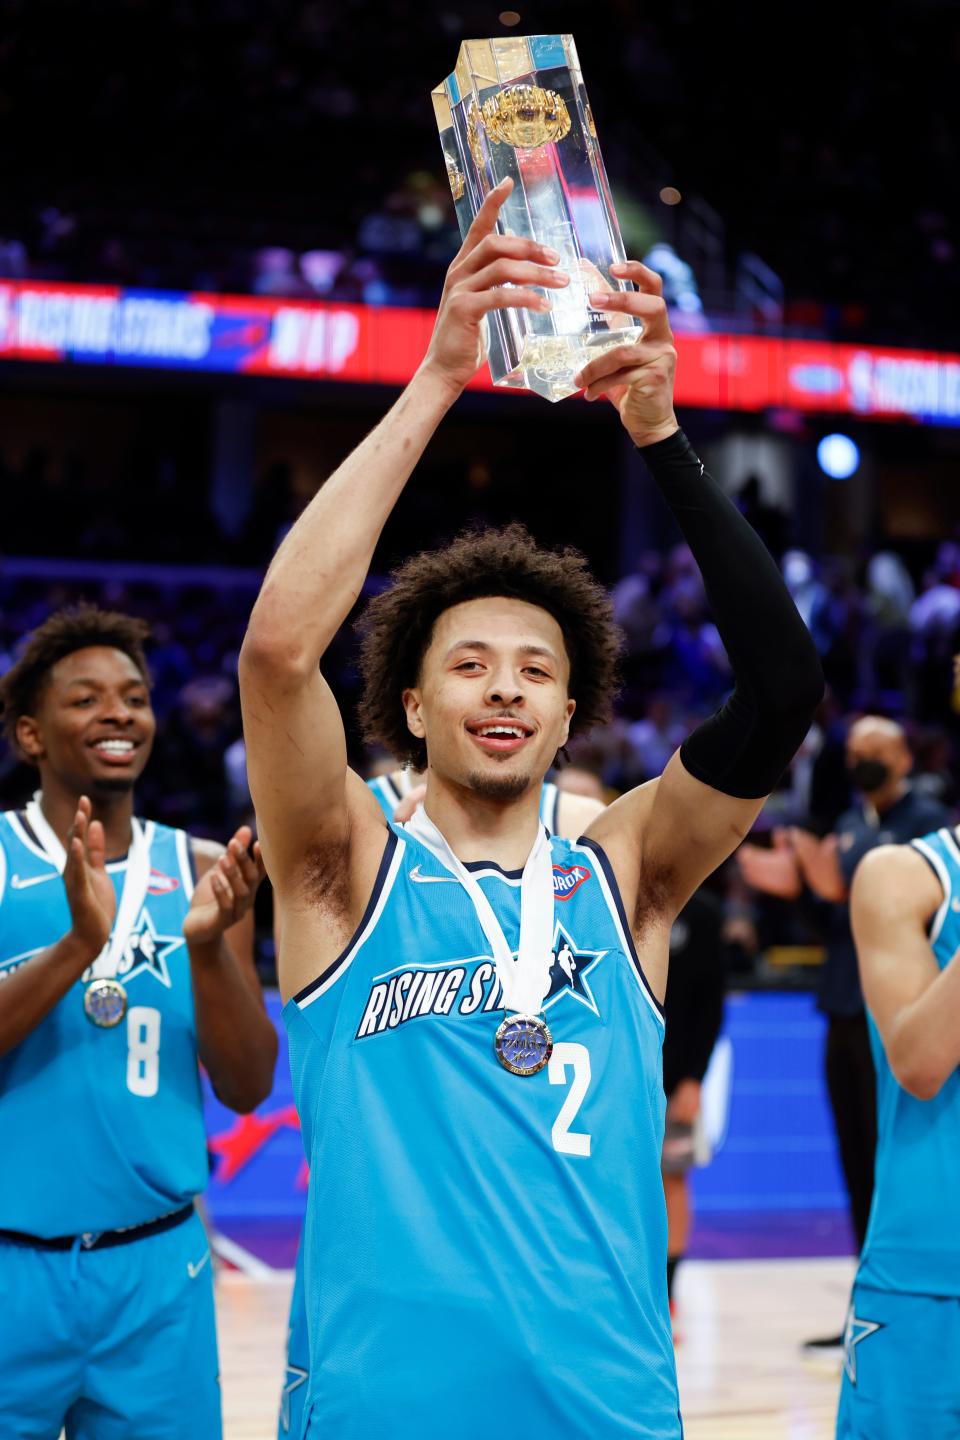 Team Barry's Cade Cunningham, of the Detroit Pistons, holds the trophy after being named the MVP of the NBA basketball Rising Stars event, Friday, Feb. 18, 2022, in Cleveland. Team Barry defeated Team Isiah to win the event.